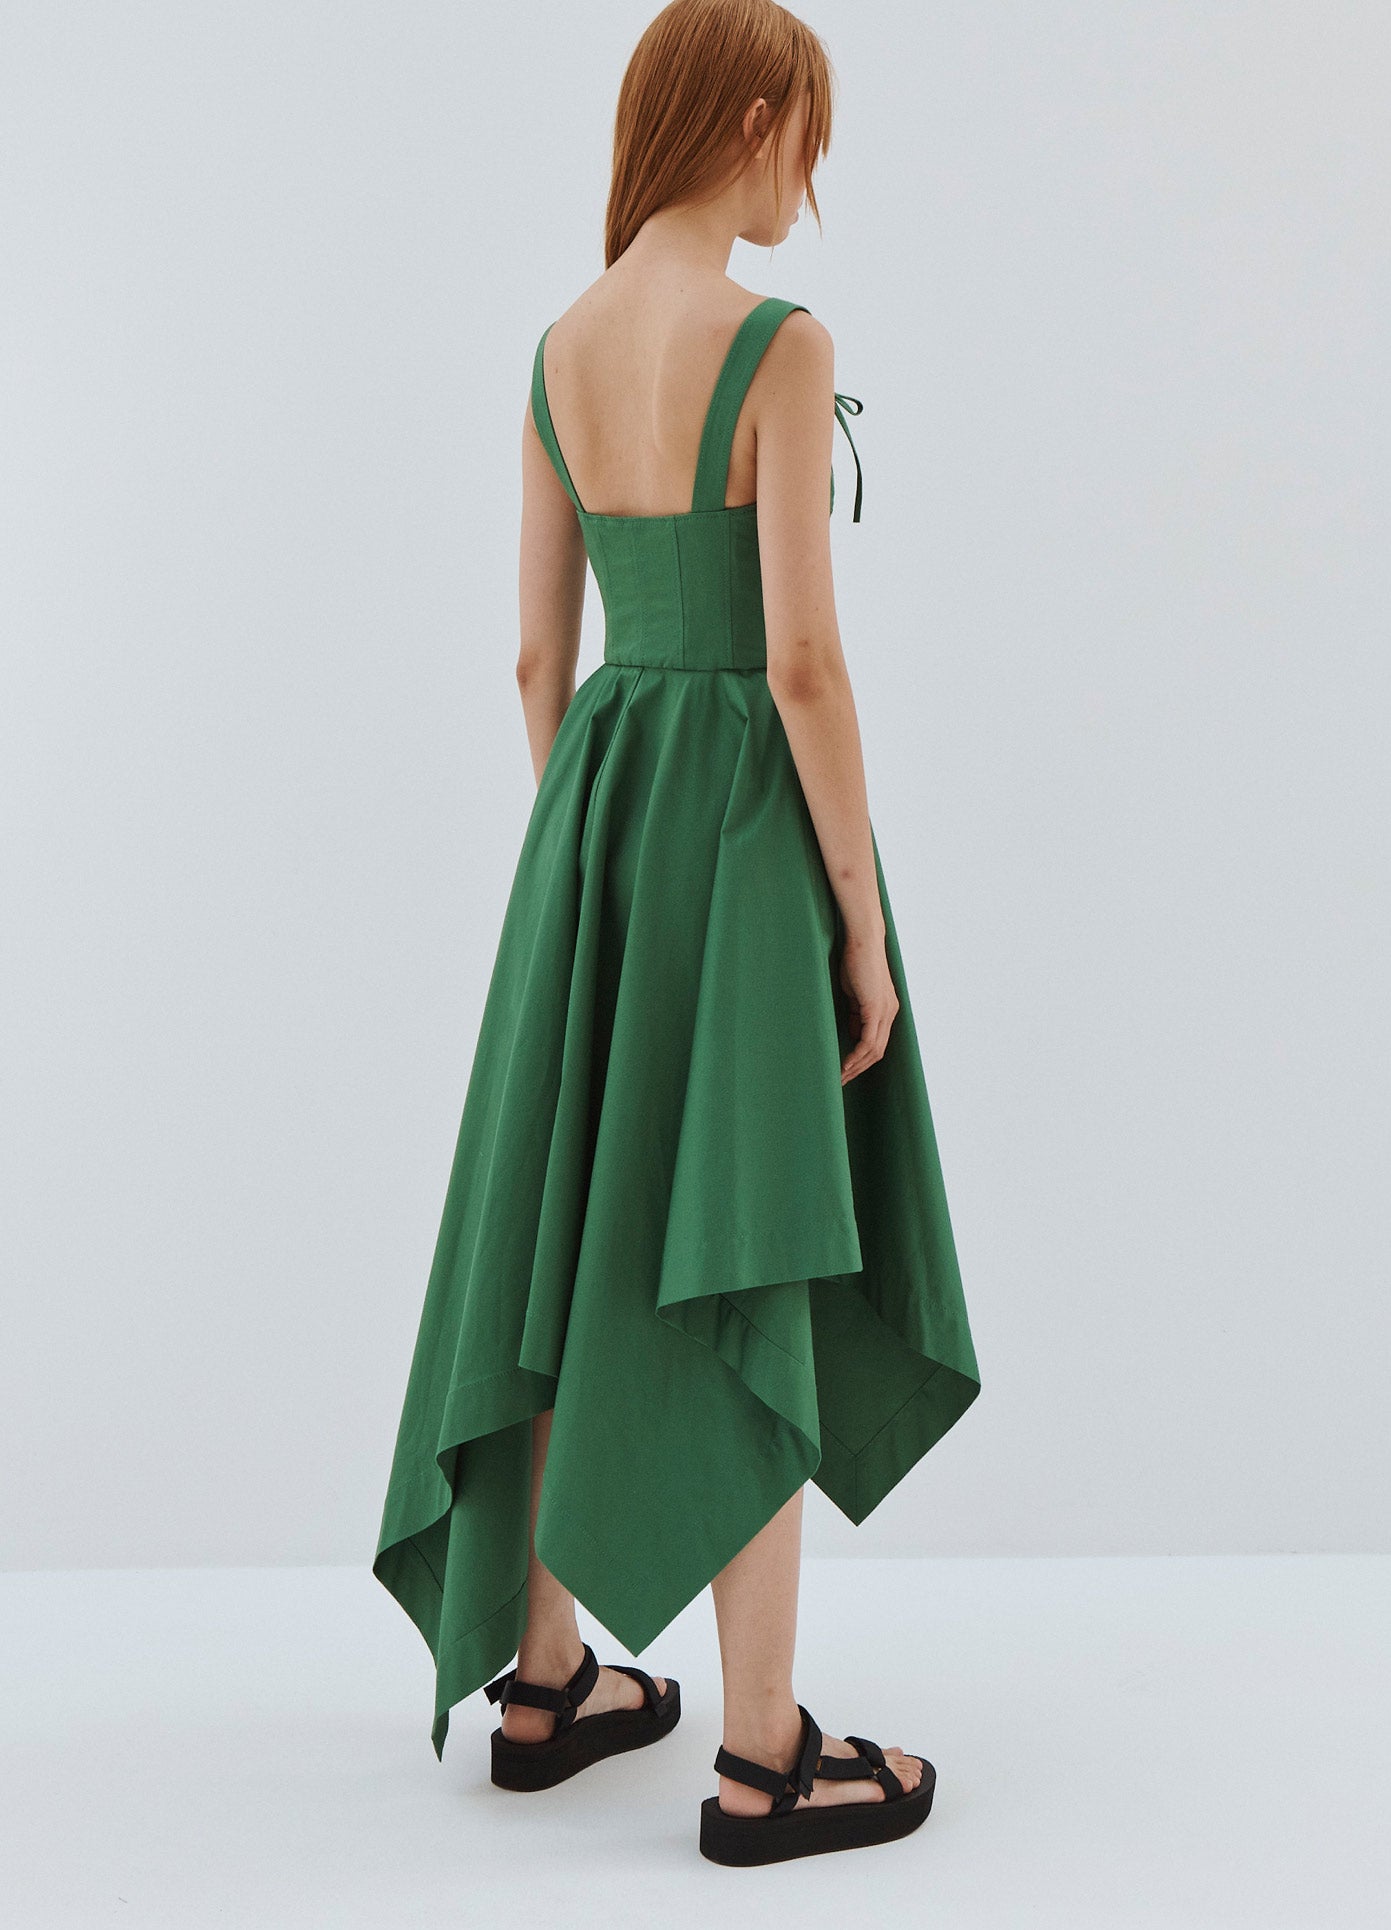 MONSE Laced Front Sleeveless Denim Dress in Green on Model Back Tilted View